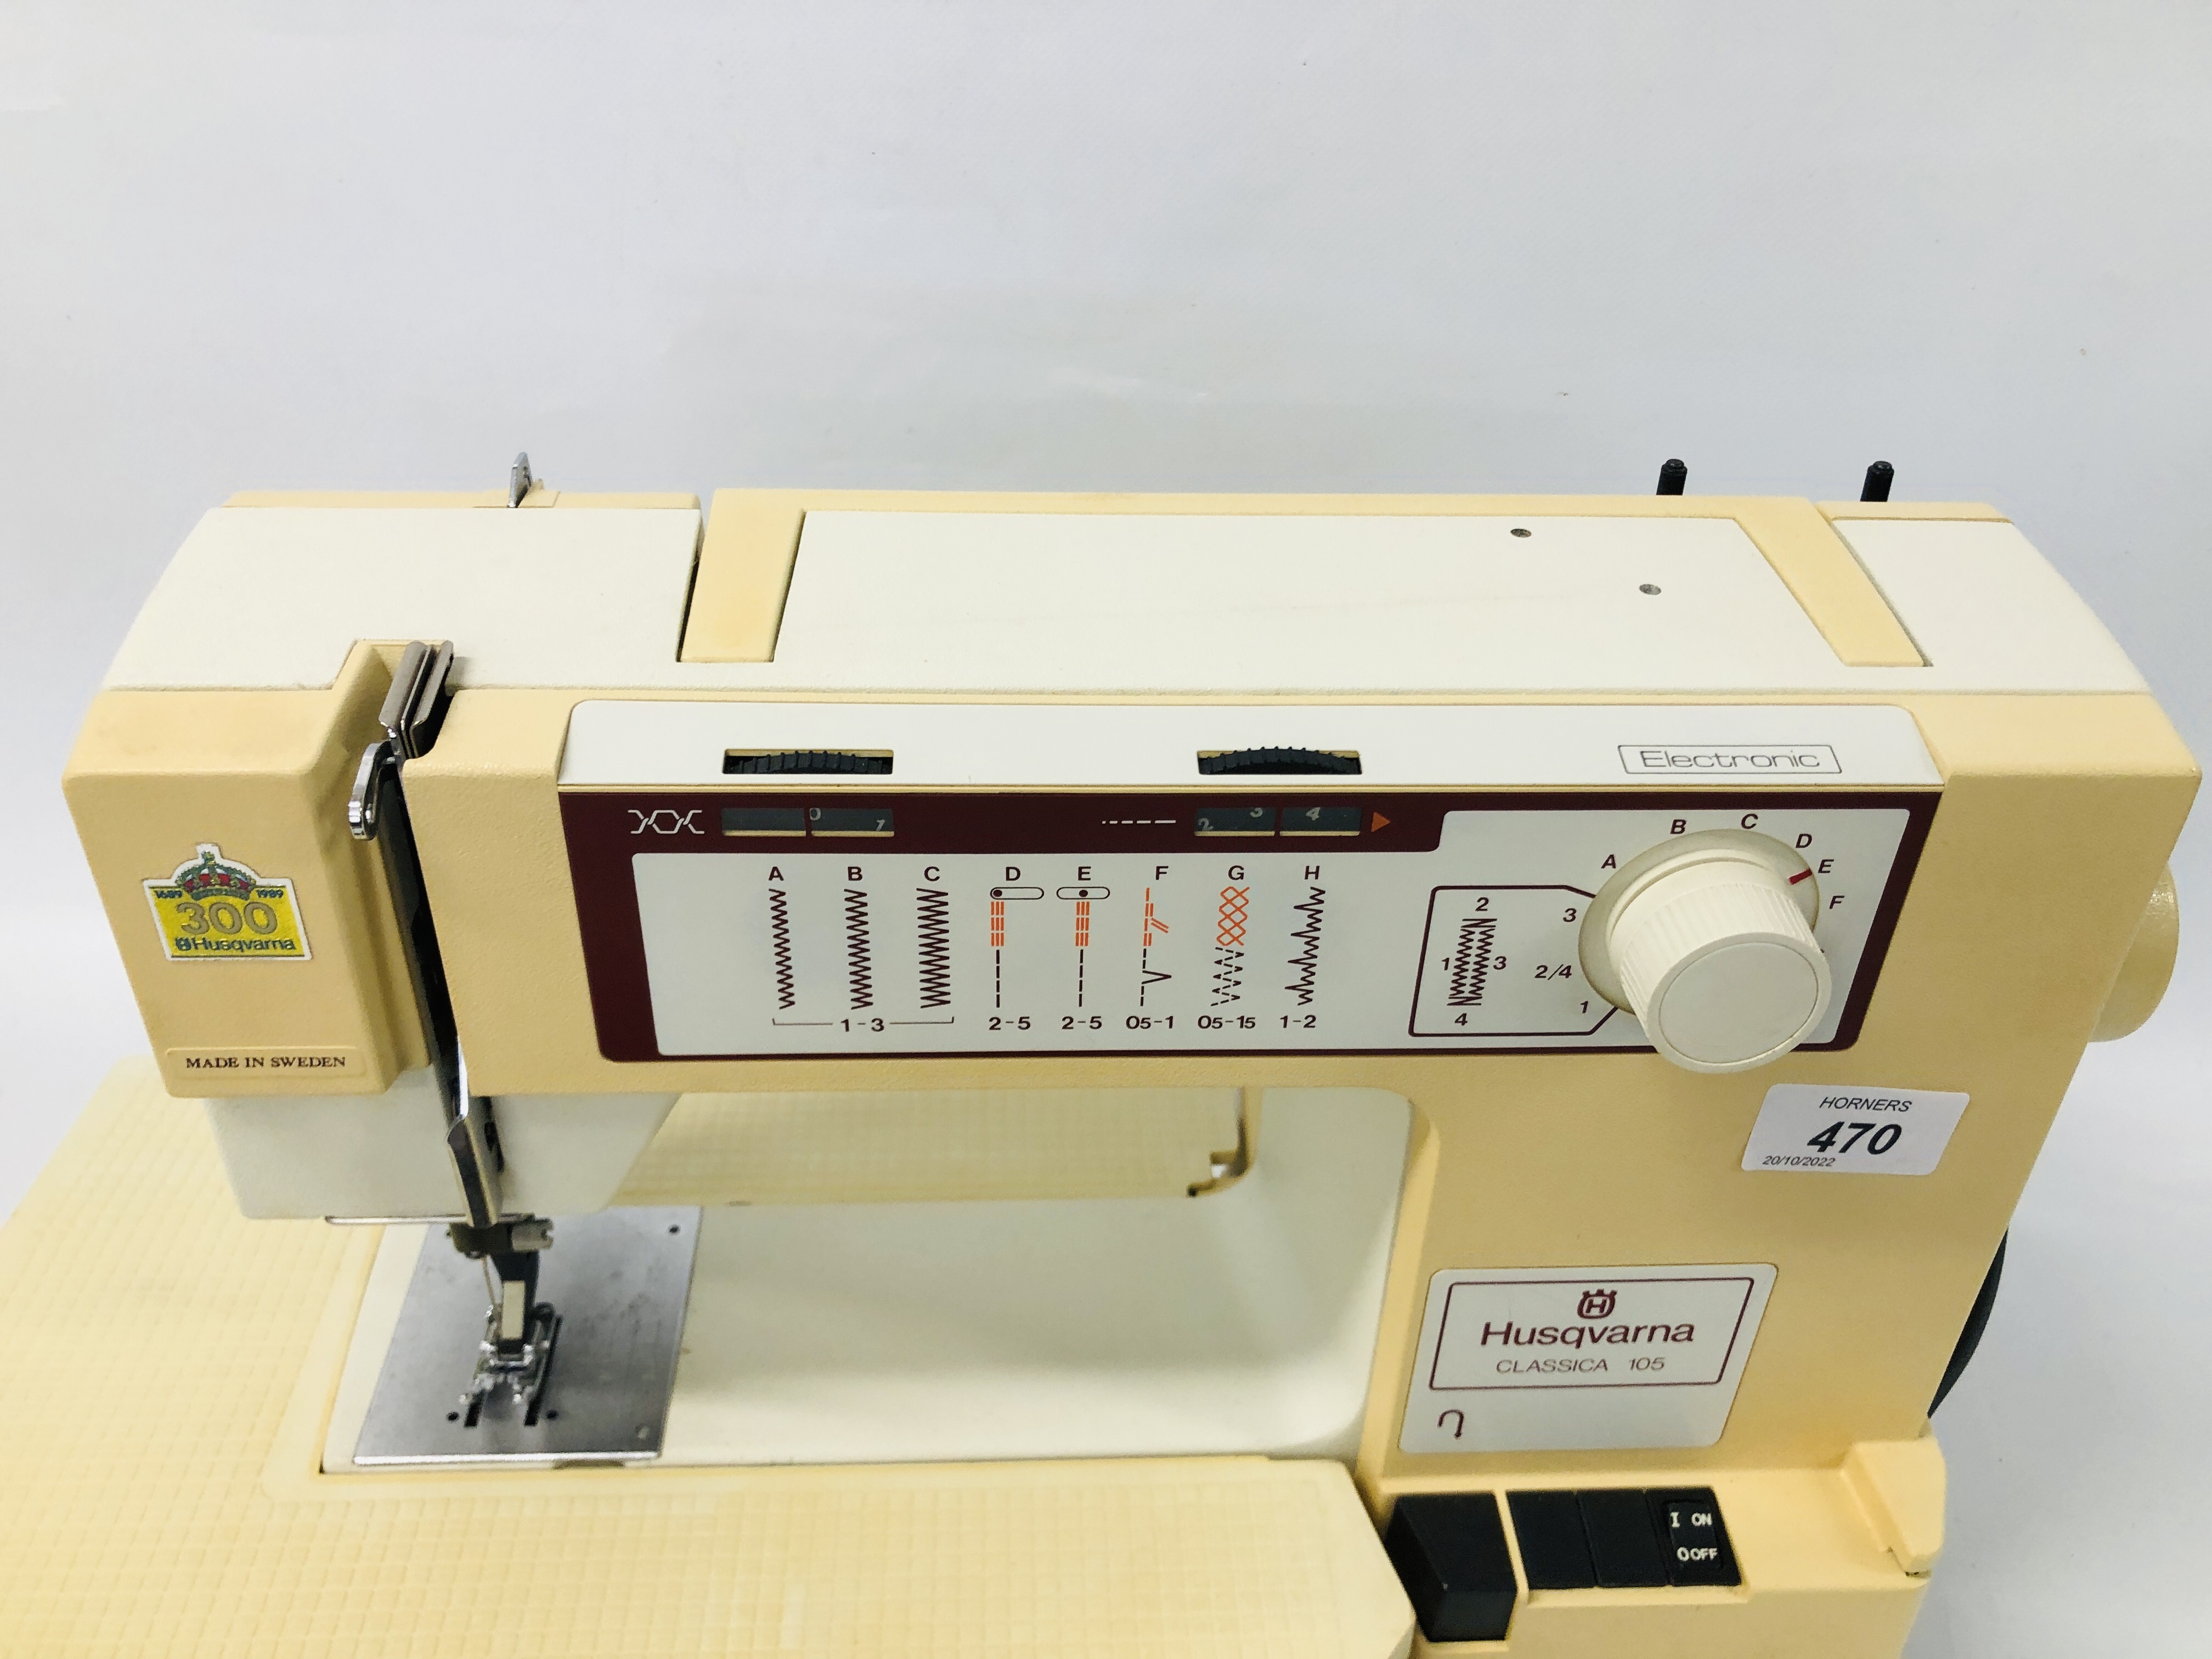 A HUSQVARNA CLASSICA SEWING MACHINE WITH FOOT PEDAL AND MANUAL - SOLD AS SEEN. - Image 3 of 5